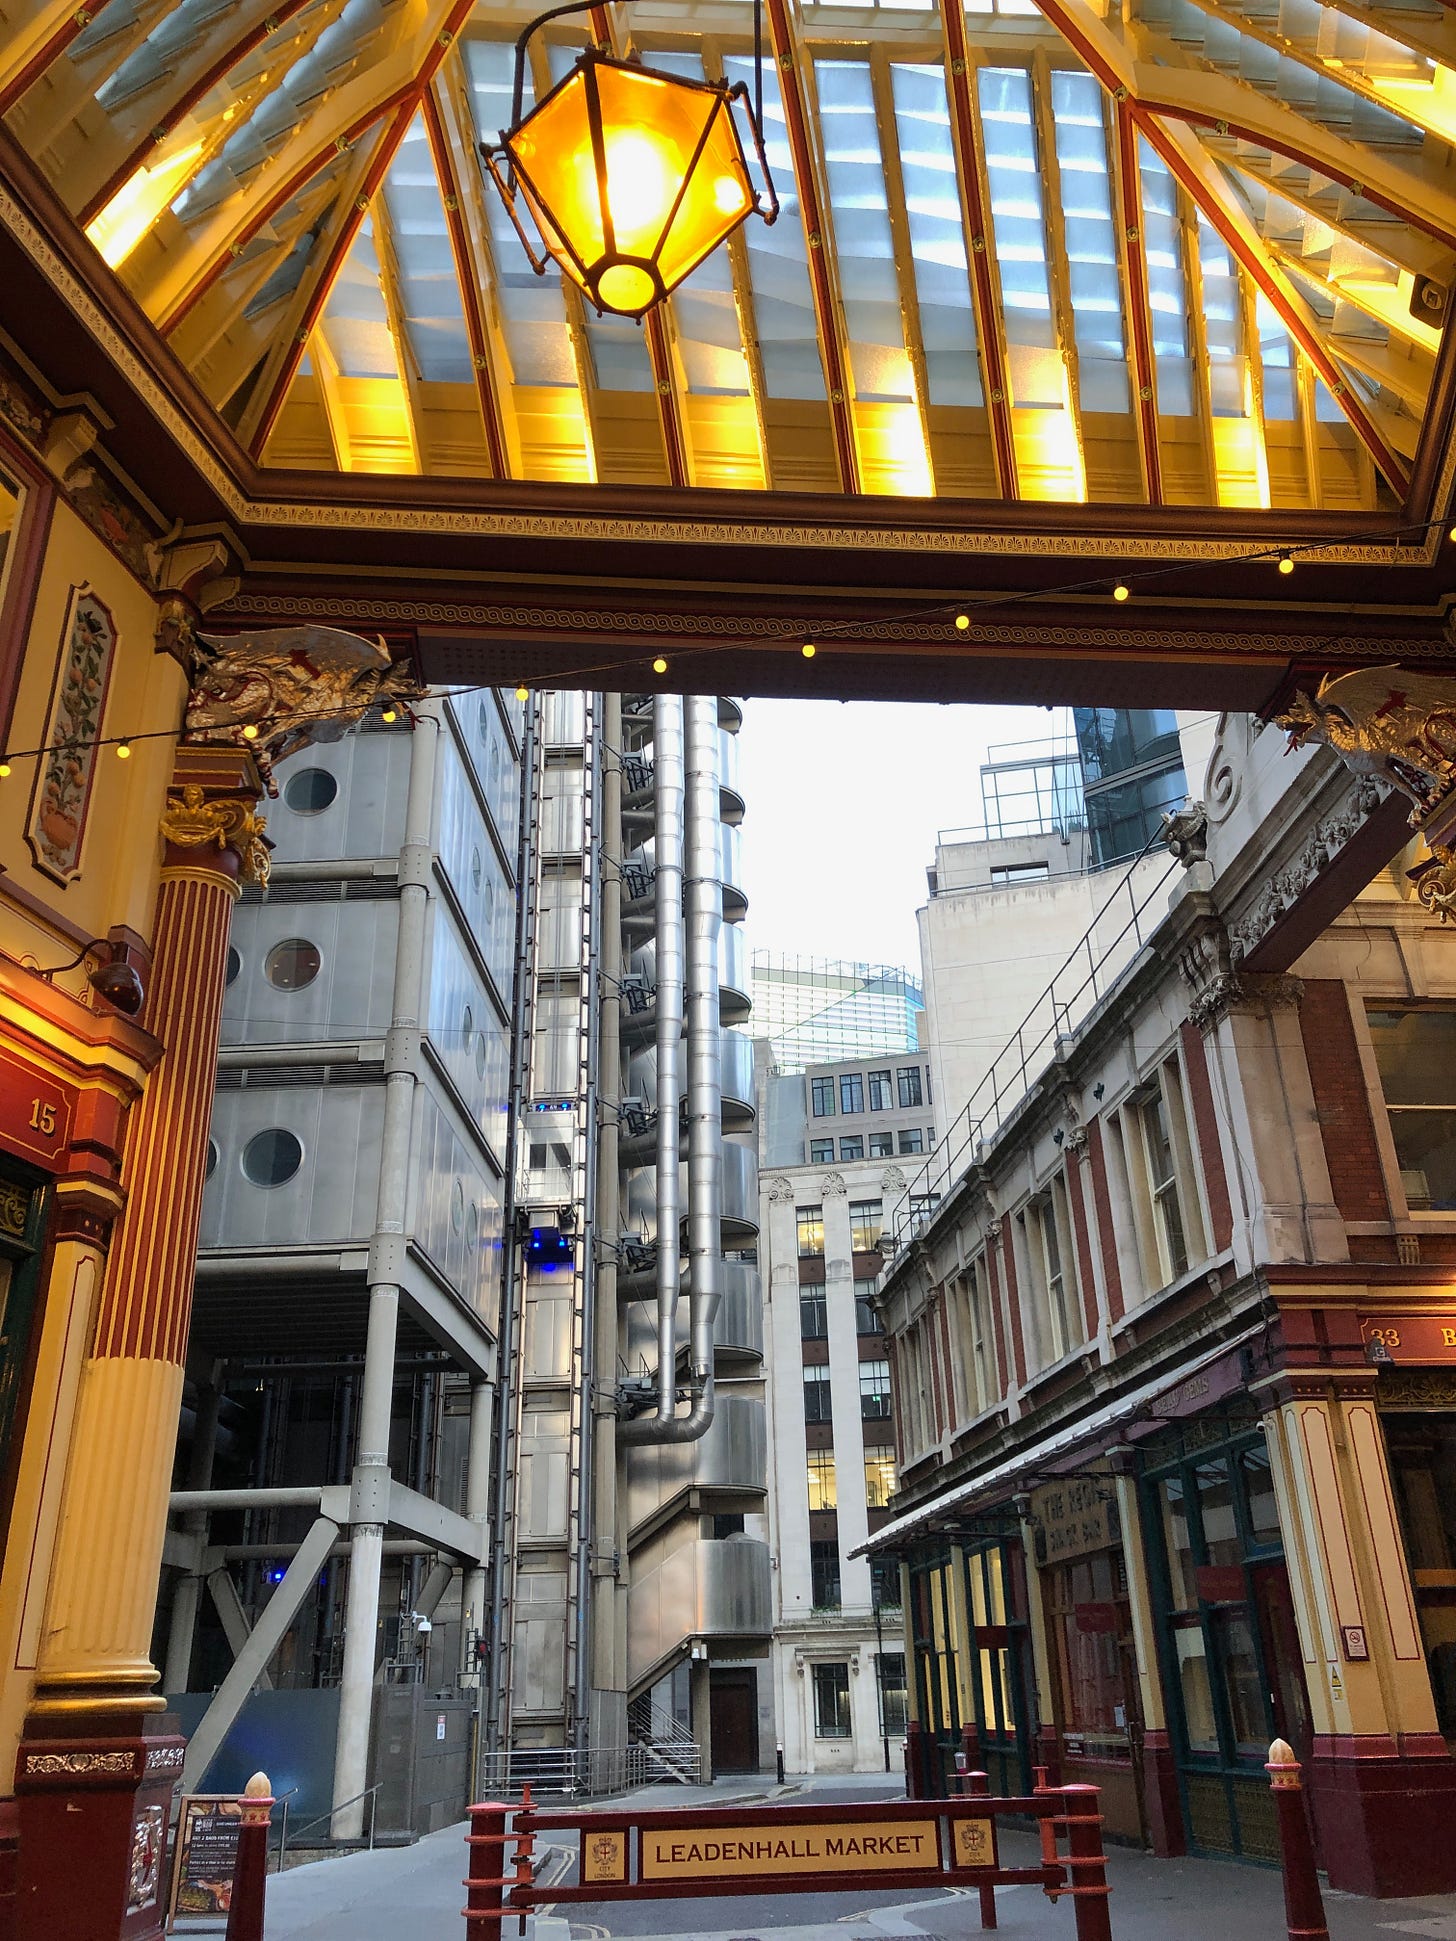 Glass-roofed market building, lamp above, combination of industrial and historic buildings visible through the opening. The sign in the foreground reads: "Leadenhall Market".